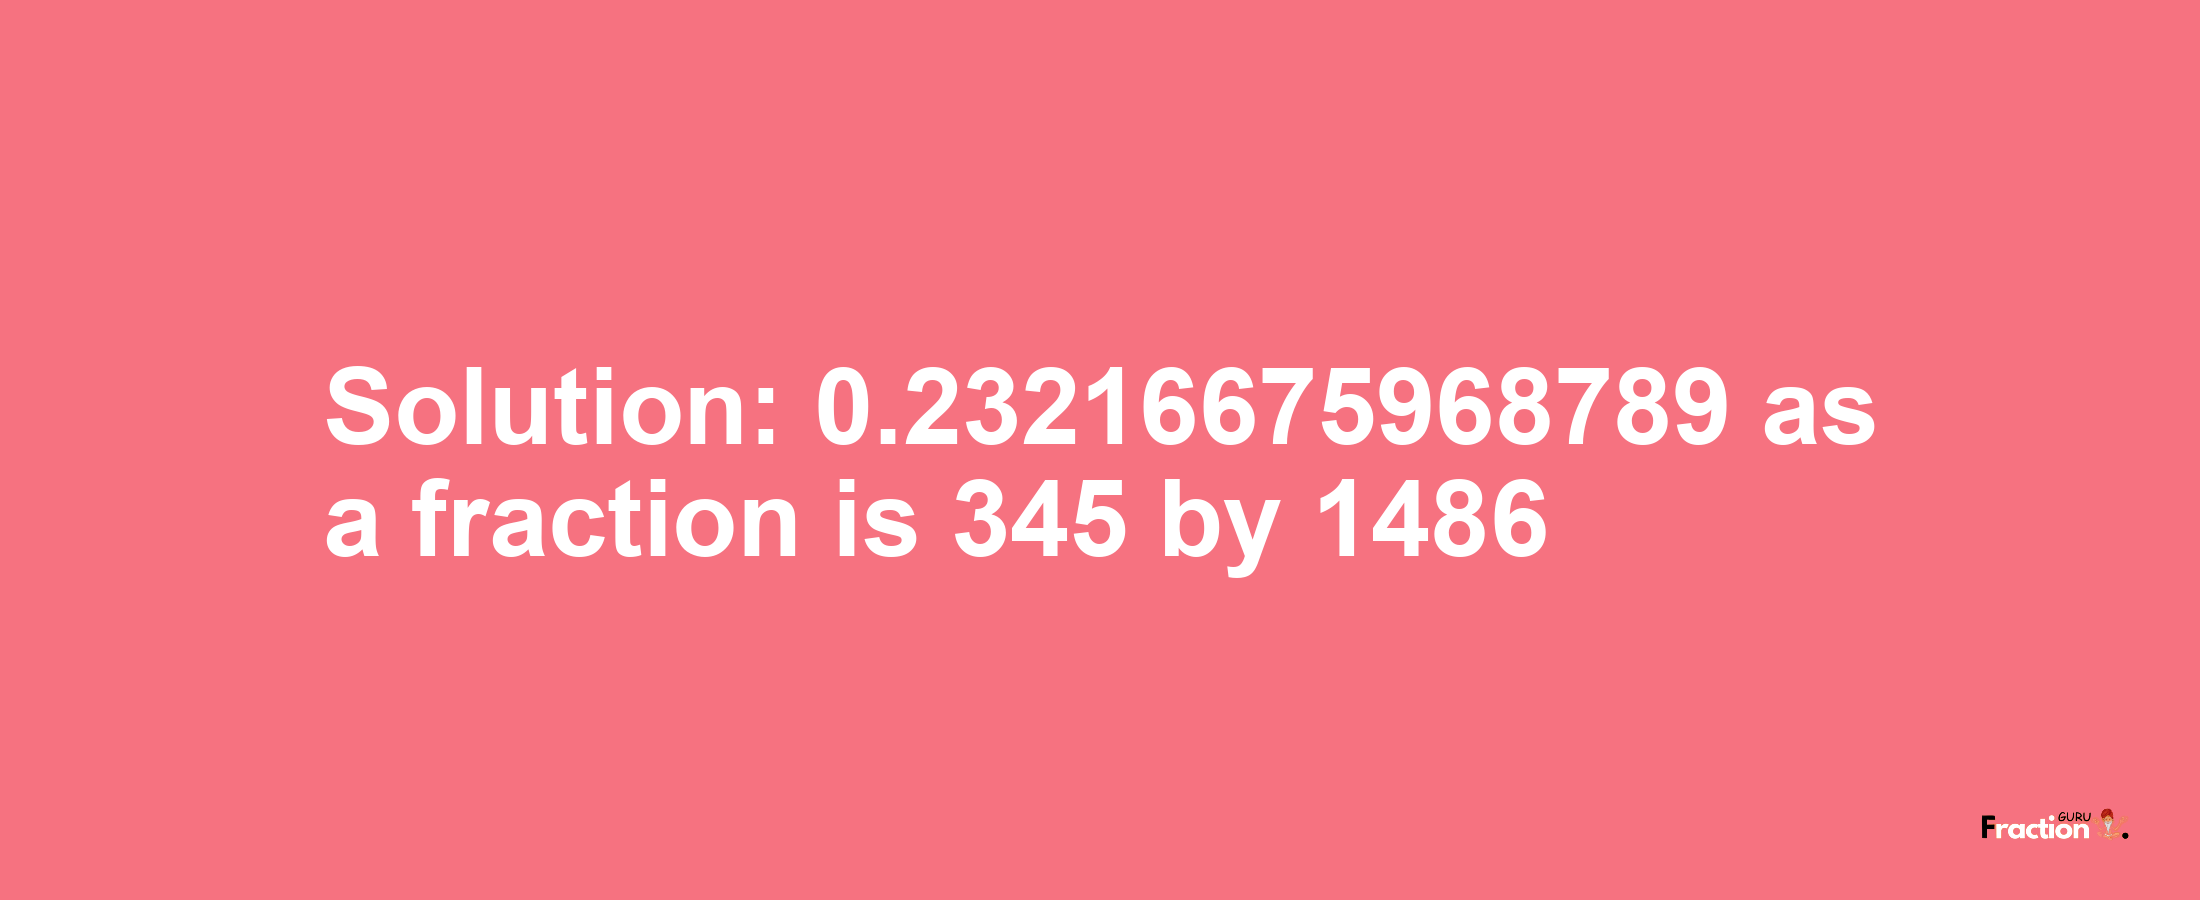 Solution:0.23216675968789 as a fraction is 345/1486